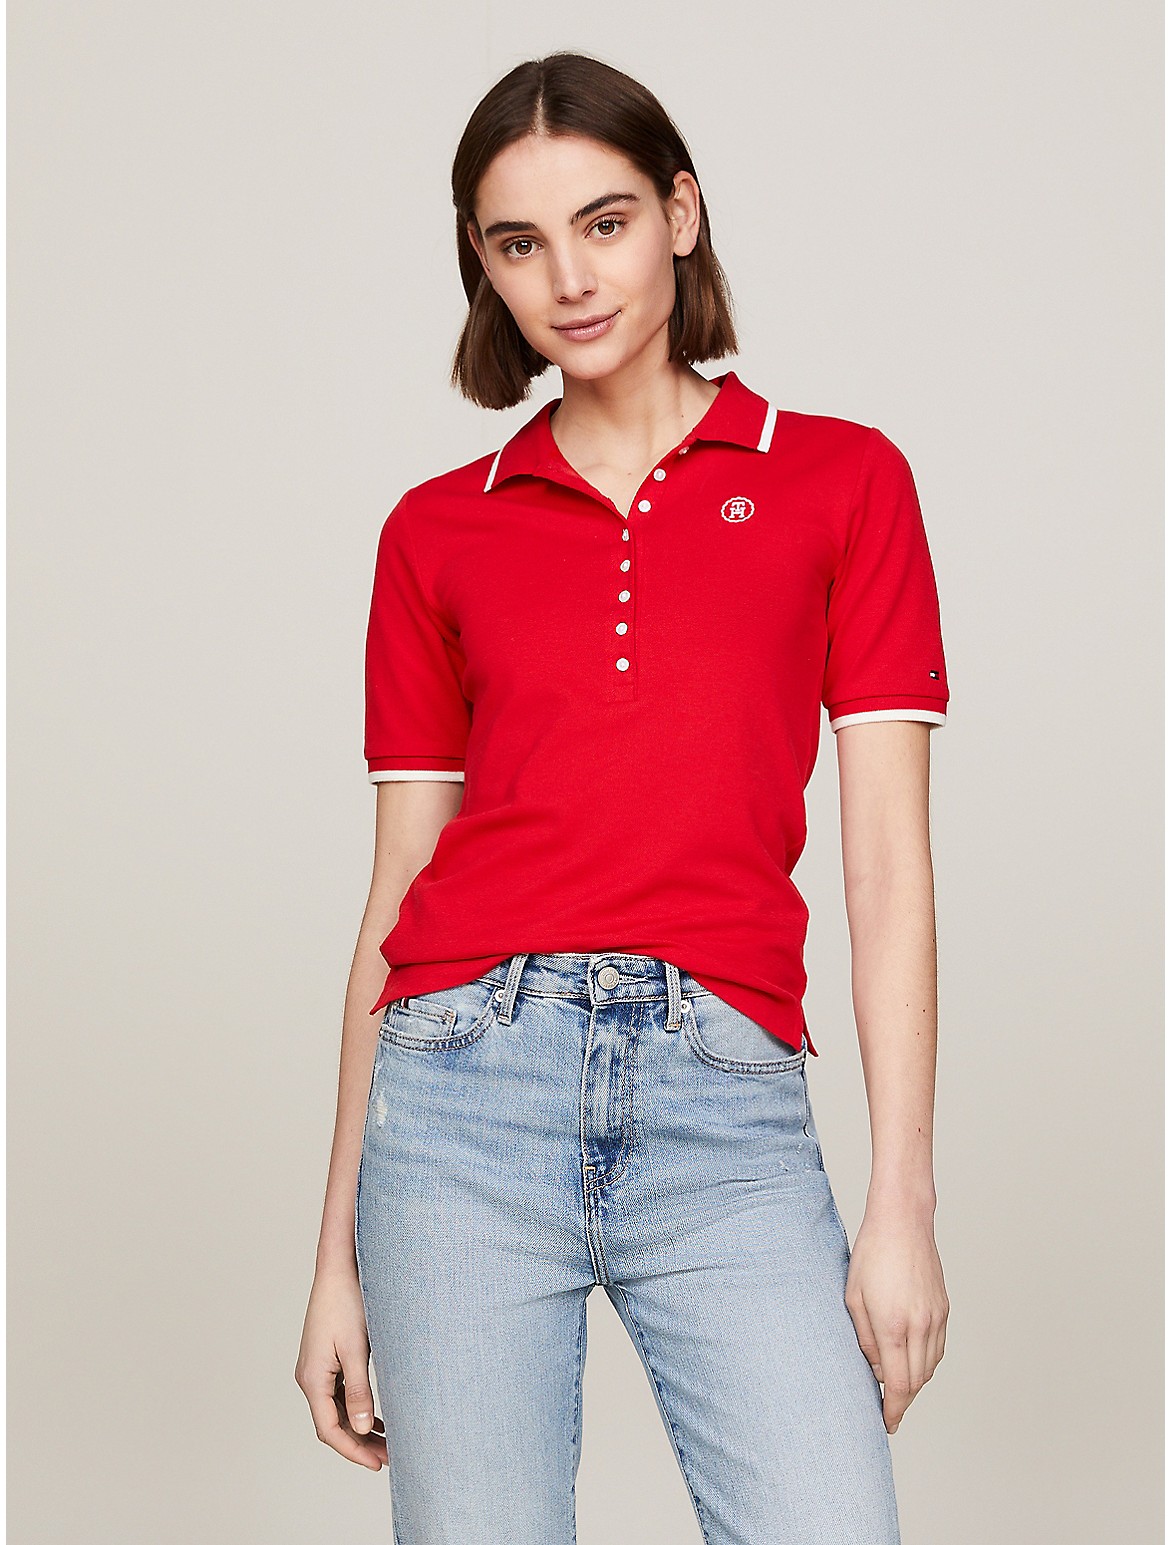 Tommy Hilfiger Women's Slim Fit Tipped TH Monogram Polo